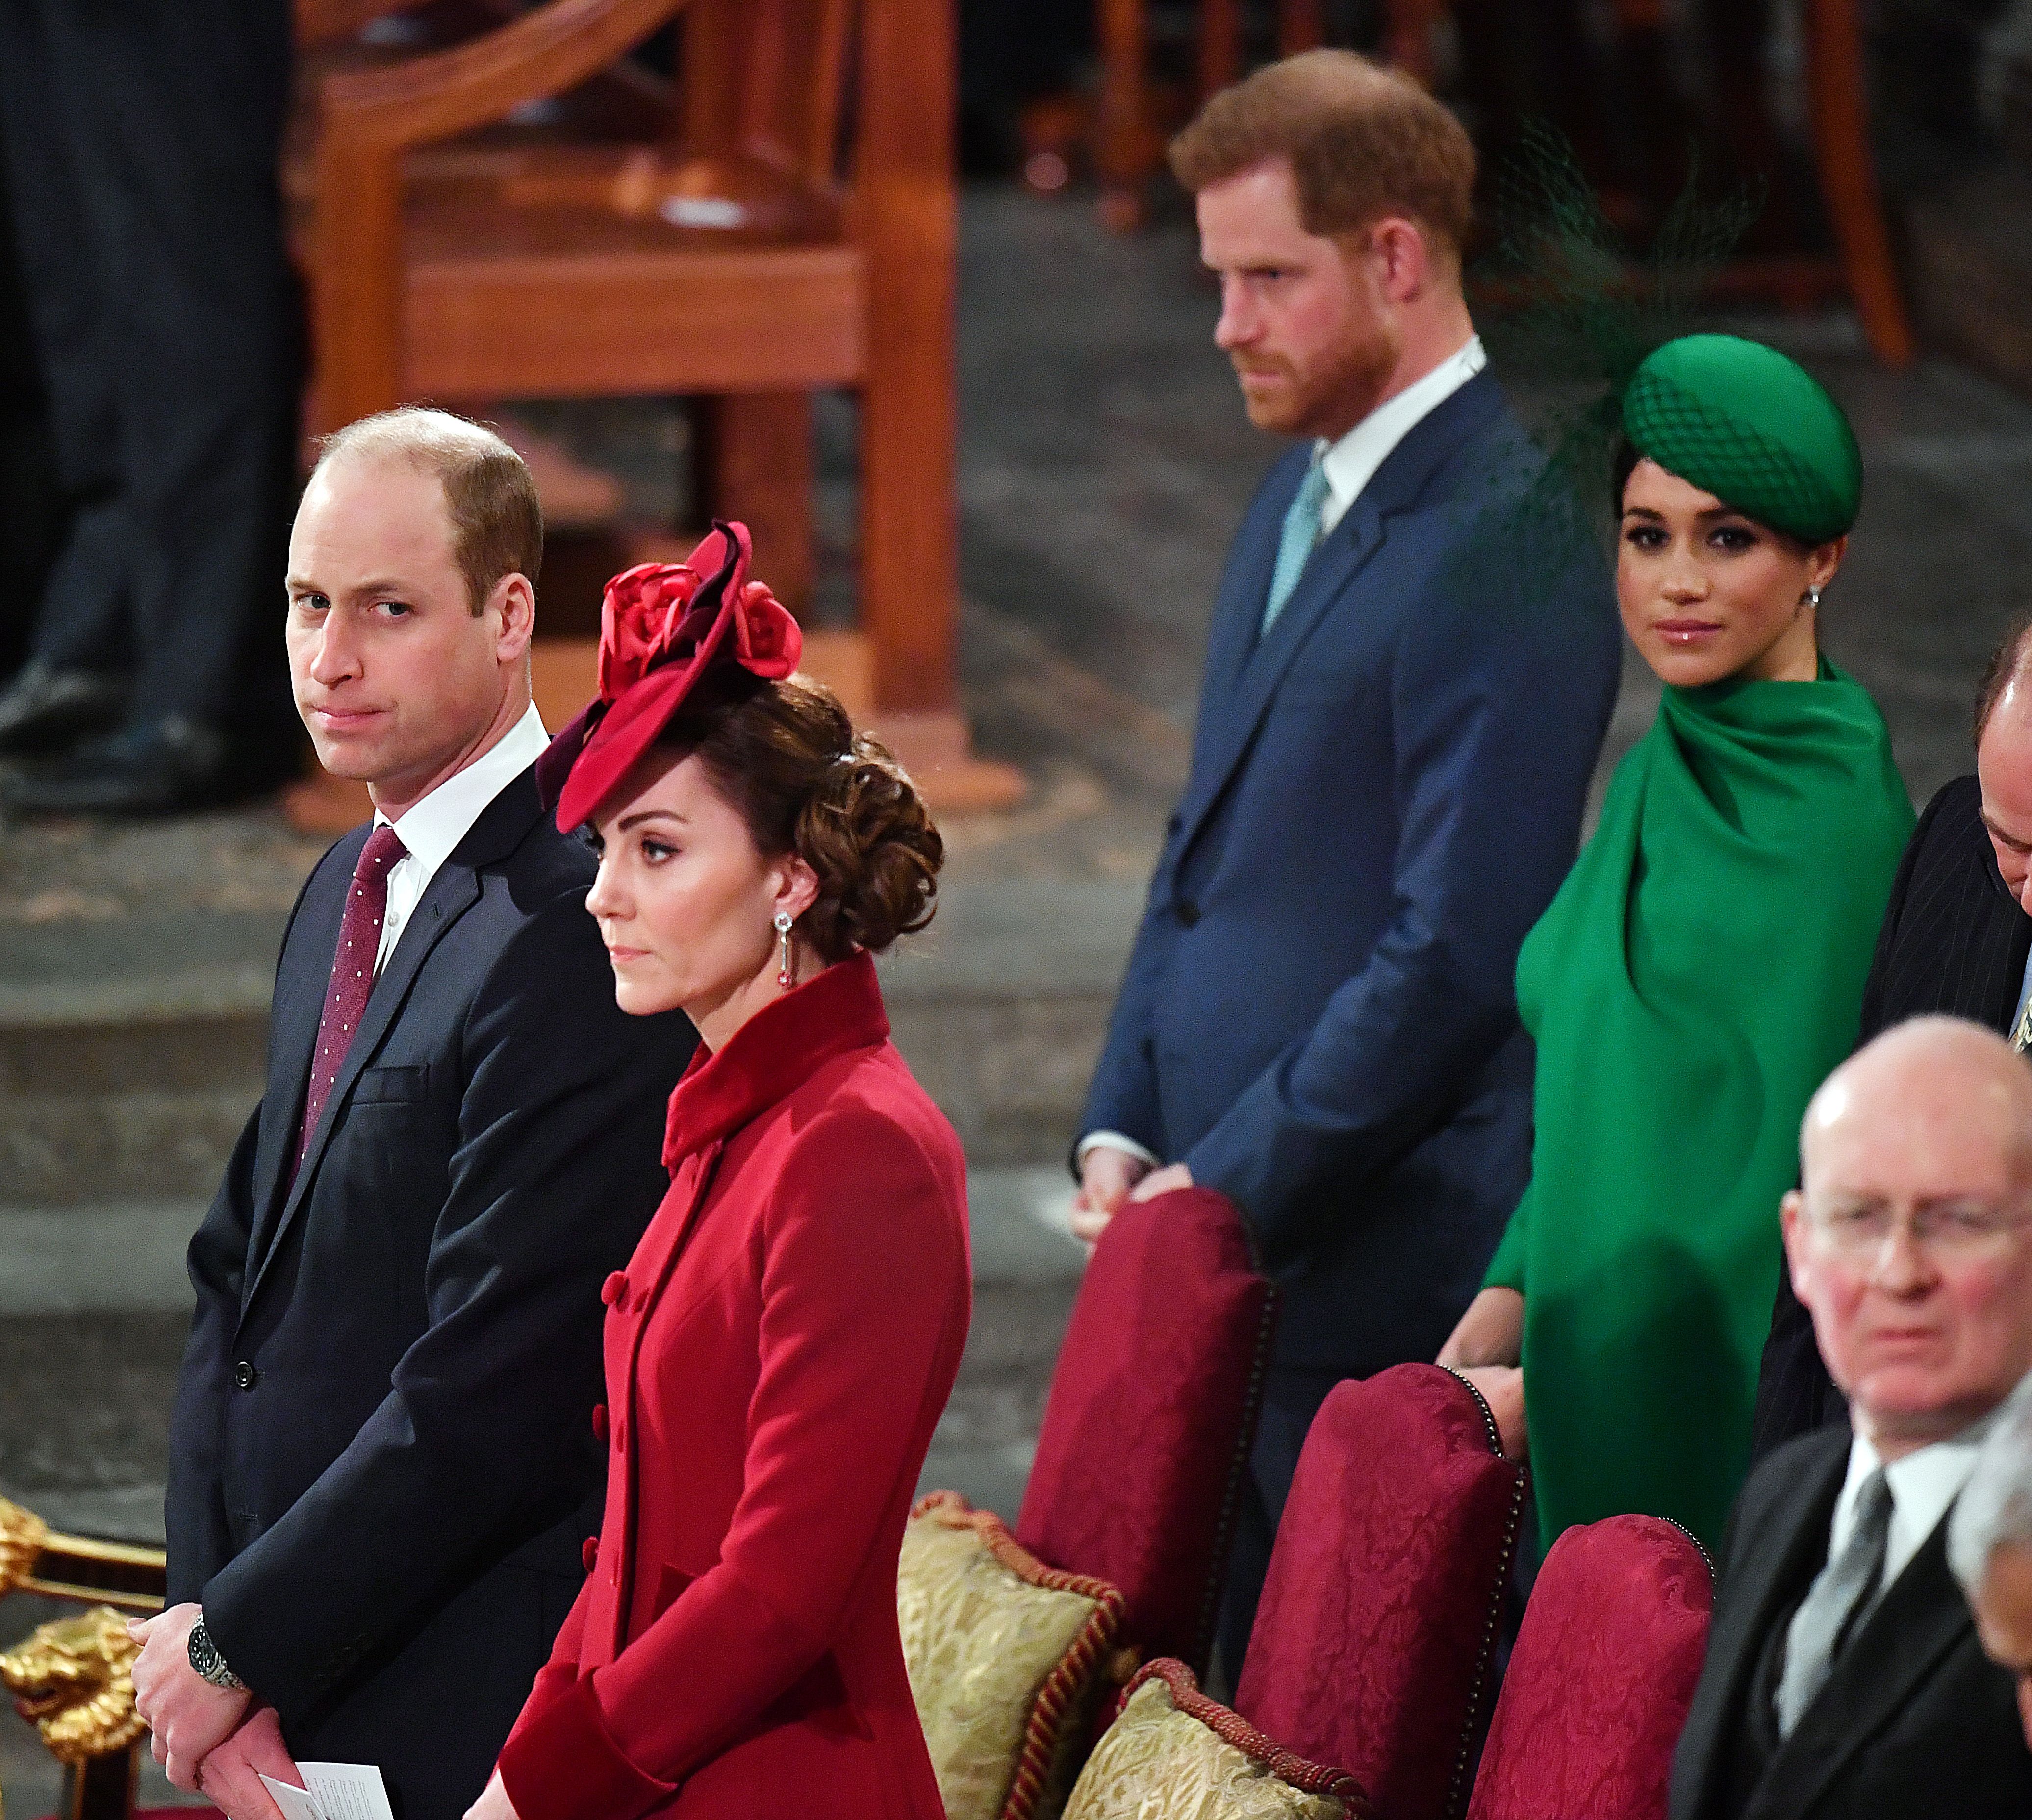 Britain's Prince Harry, Duke of Sussex and Britain's Meghan, Duchess of Sussex sit behind Britain's Prince William, Duke of Cambridge and Britain's Catherine, Duchess of Cambridge inside Westminster Abbey as they attend the annual Commonwealth service in London on March 9, 2020. |  Source: Getty Images